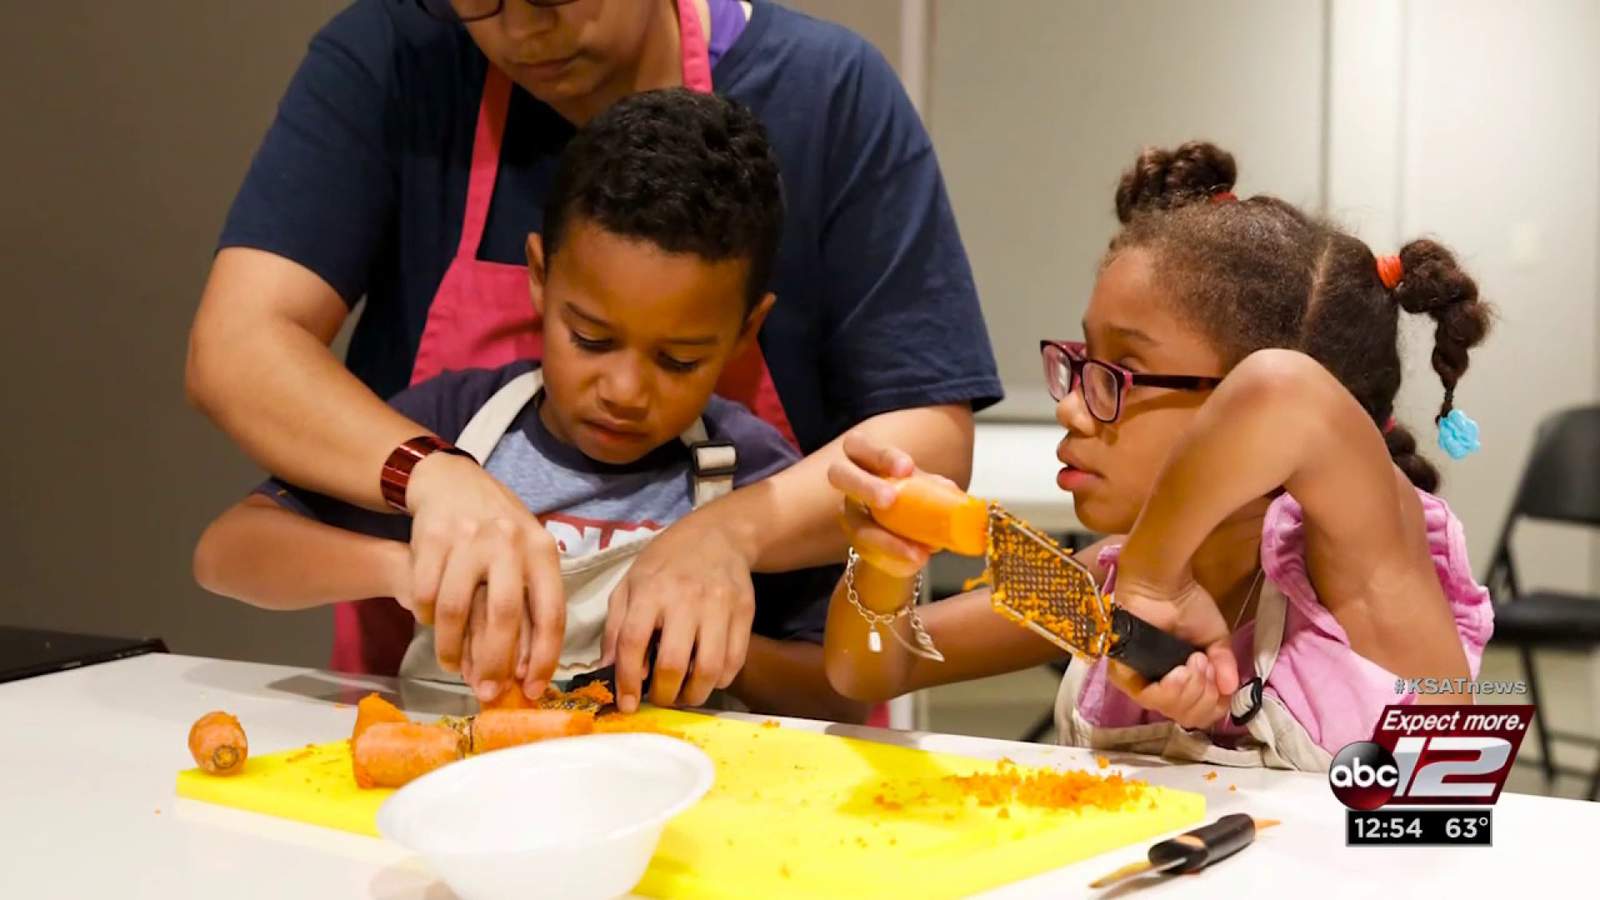 'New Week, New You': Culinary program teaches families new, health cooking techniques